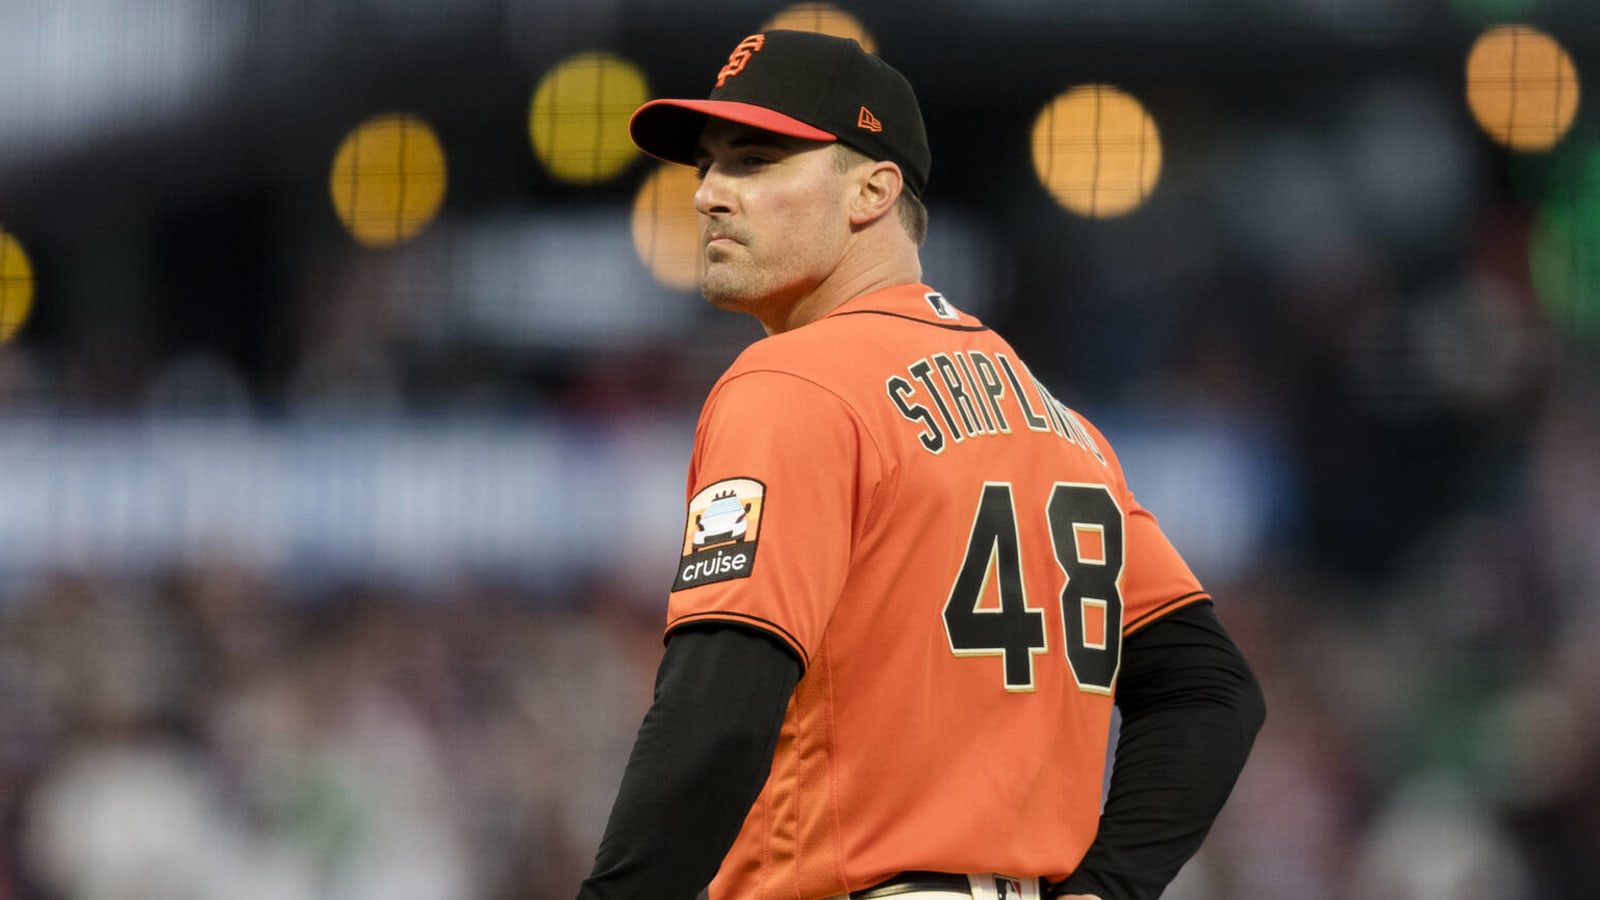 Giants trade former All-Star pitcher to Athletics